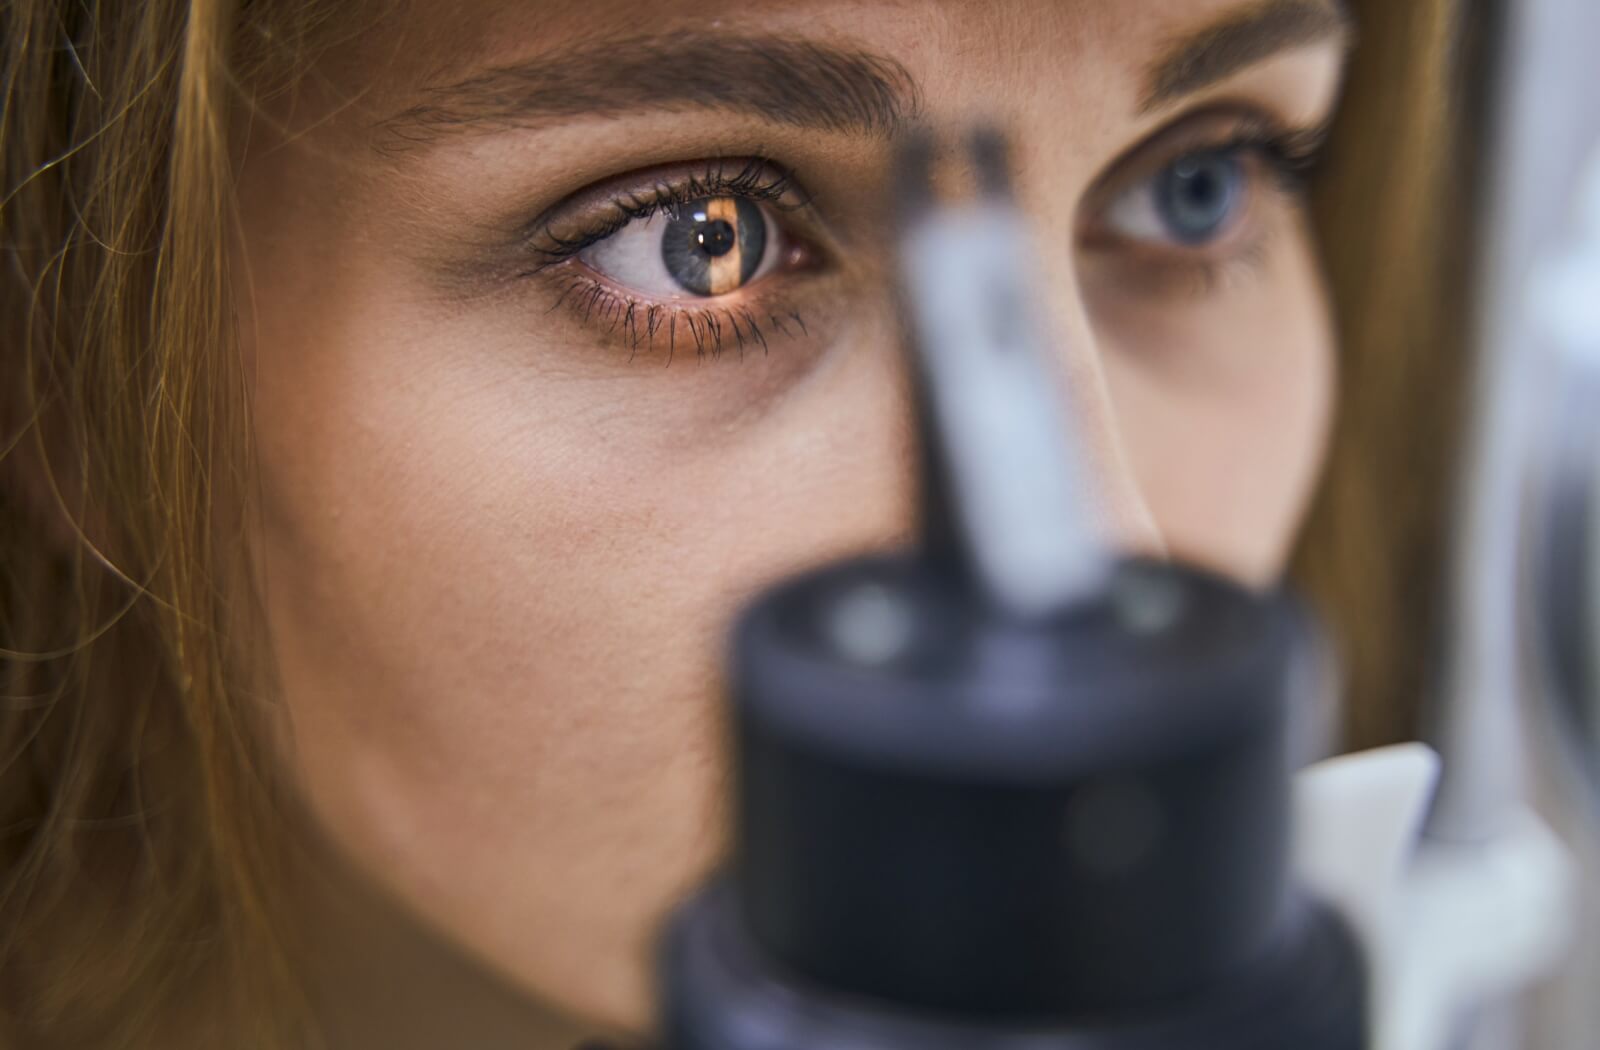 A close up of a woman receiving an eye exam to look for potential diseases